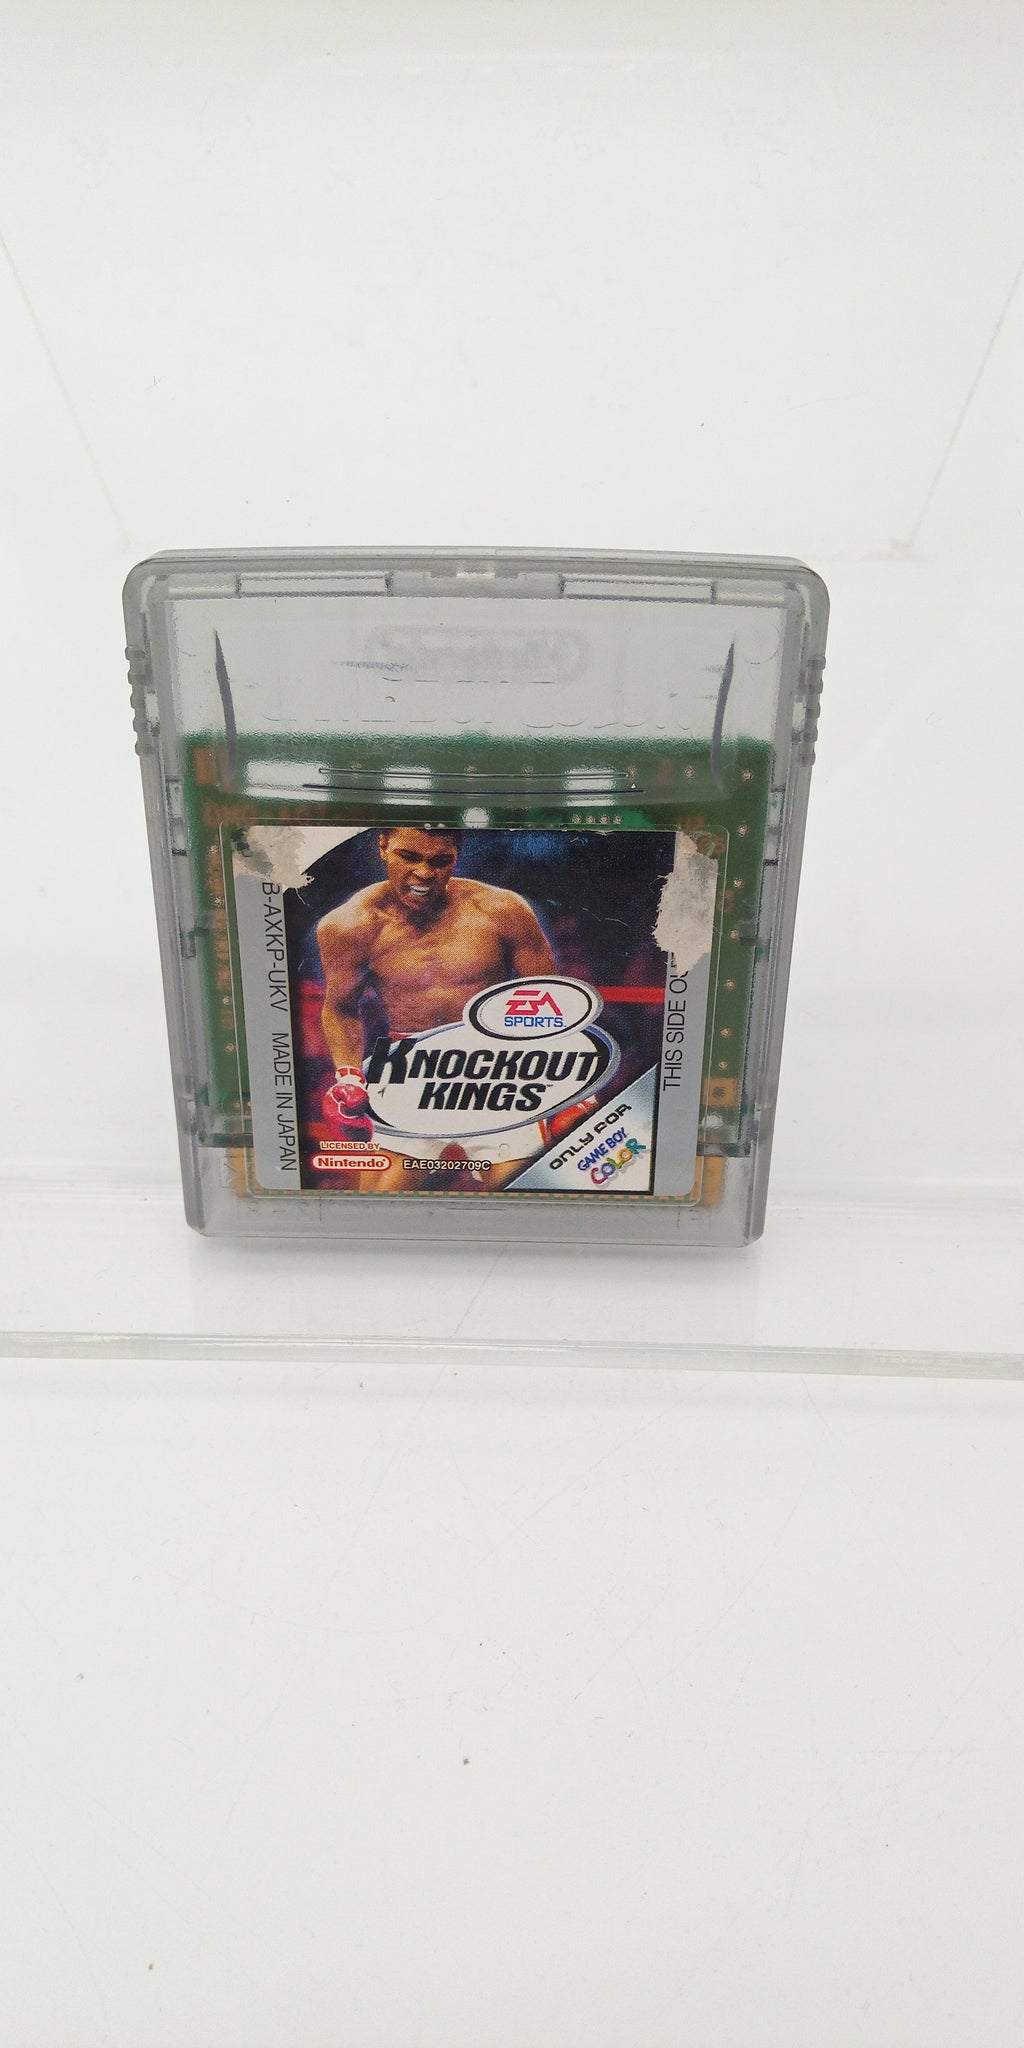 KNOCKOUT KINGS GAME BOY COLOR